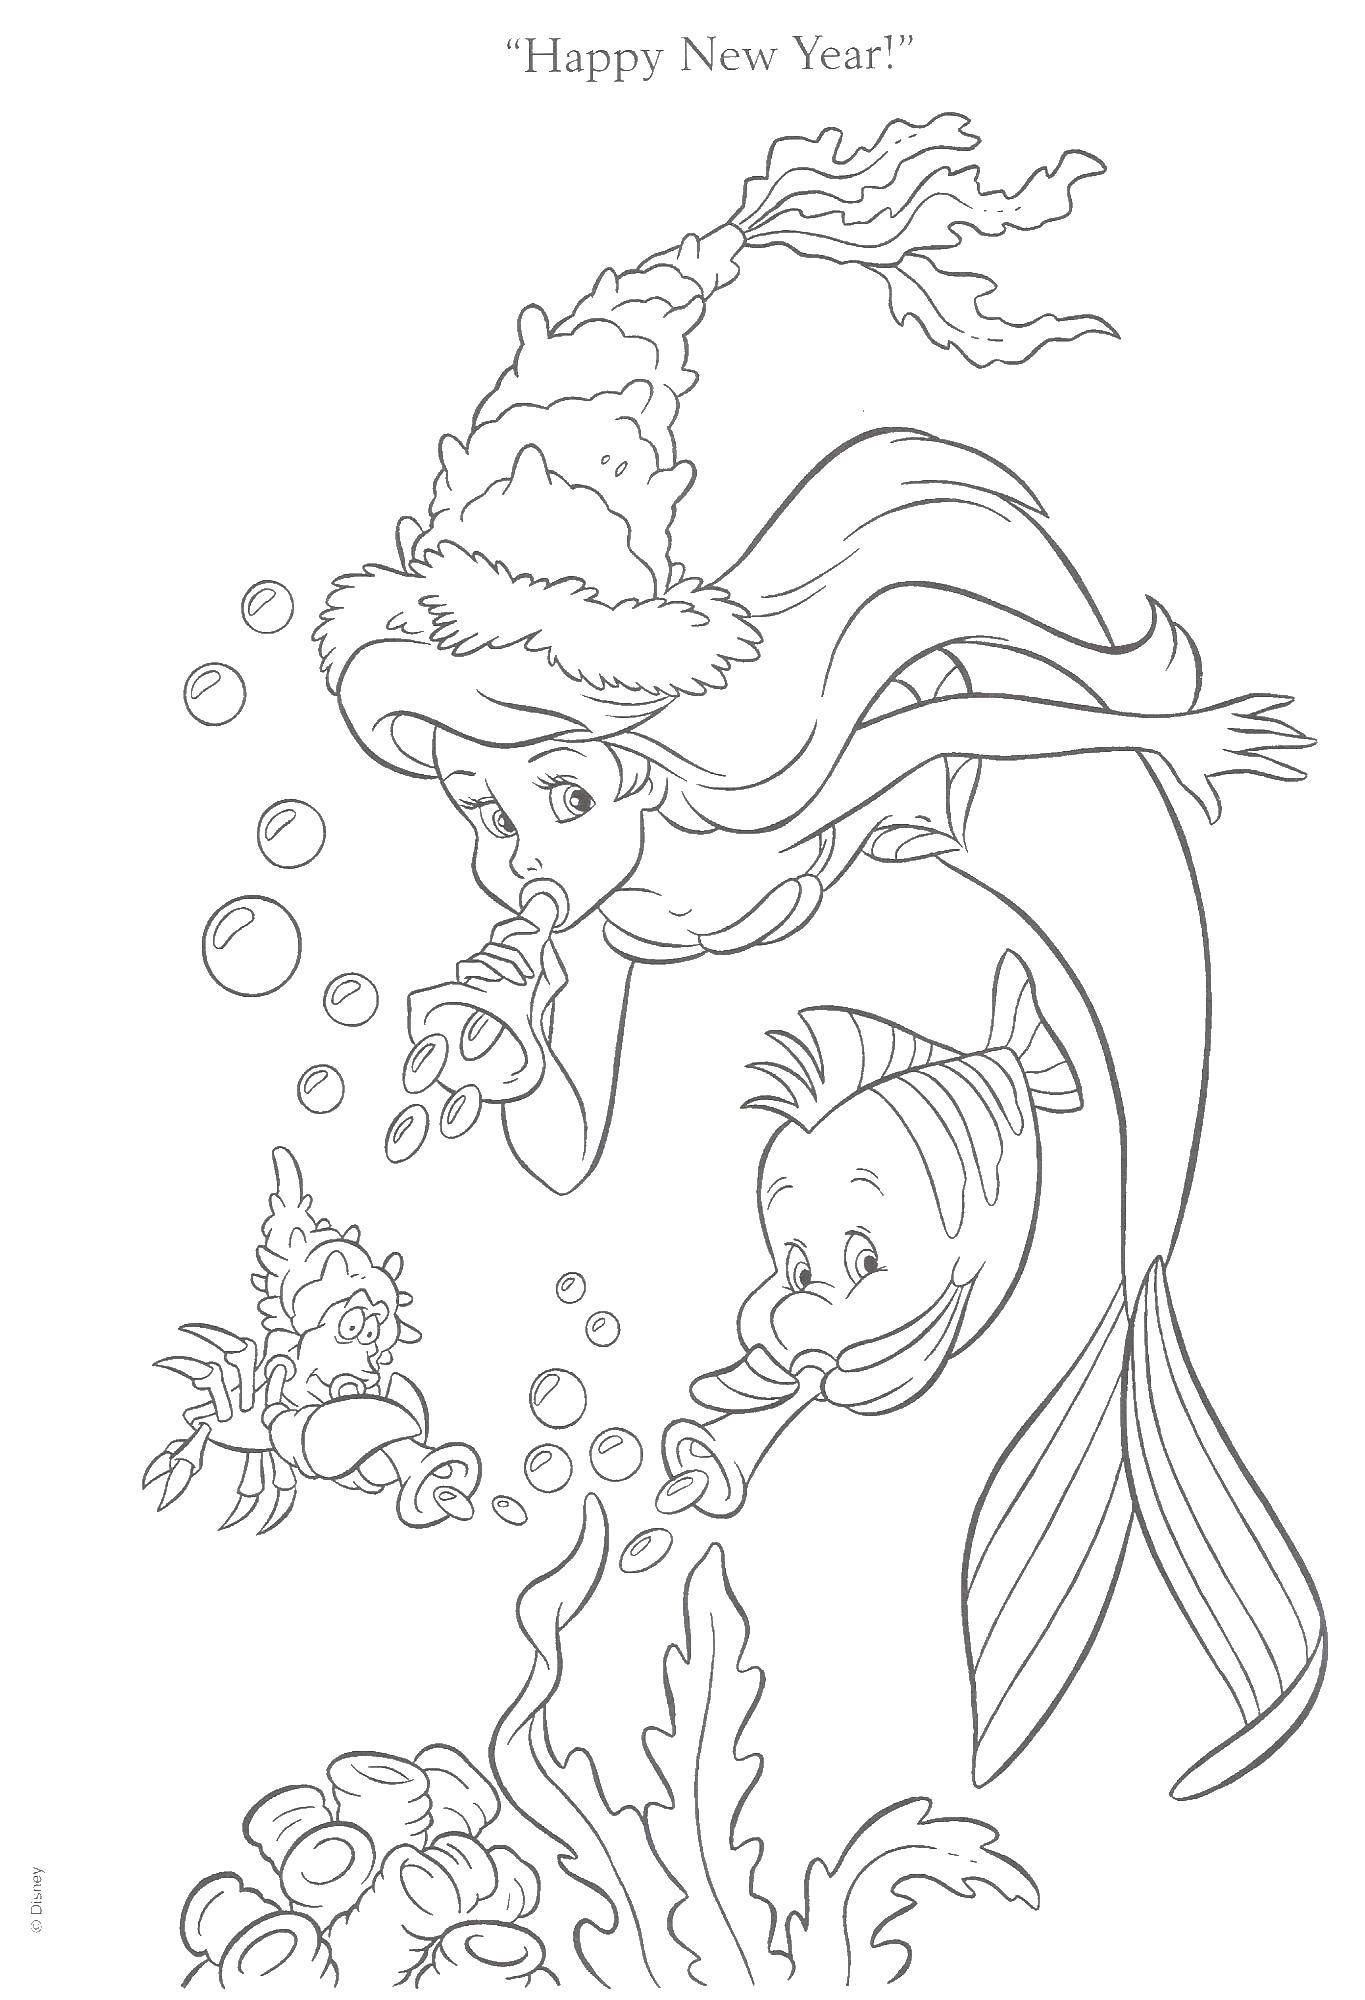 Coloring Ariel and fish. Category The little mermaid. Tags:  mermaid, girl, sea, Ariel, fish.